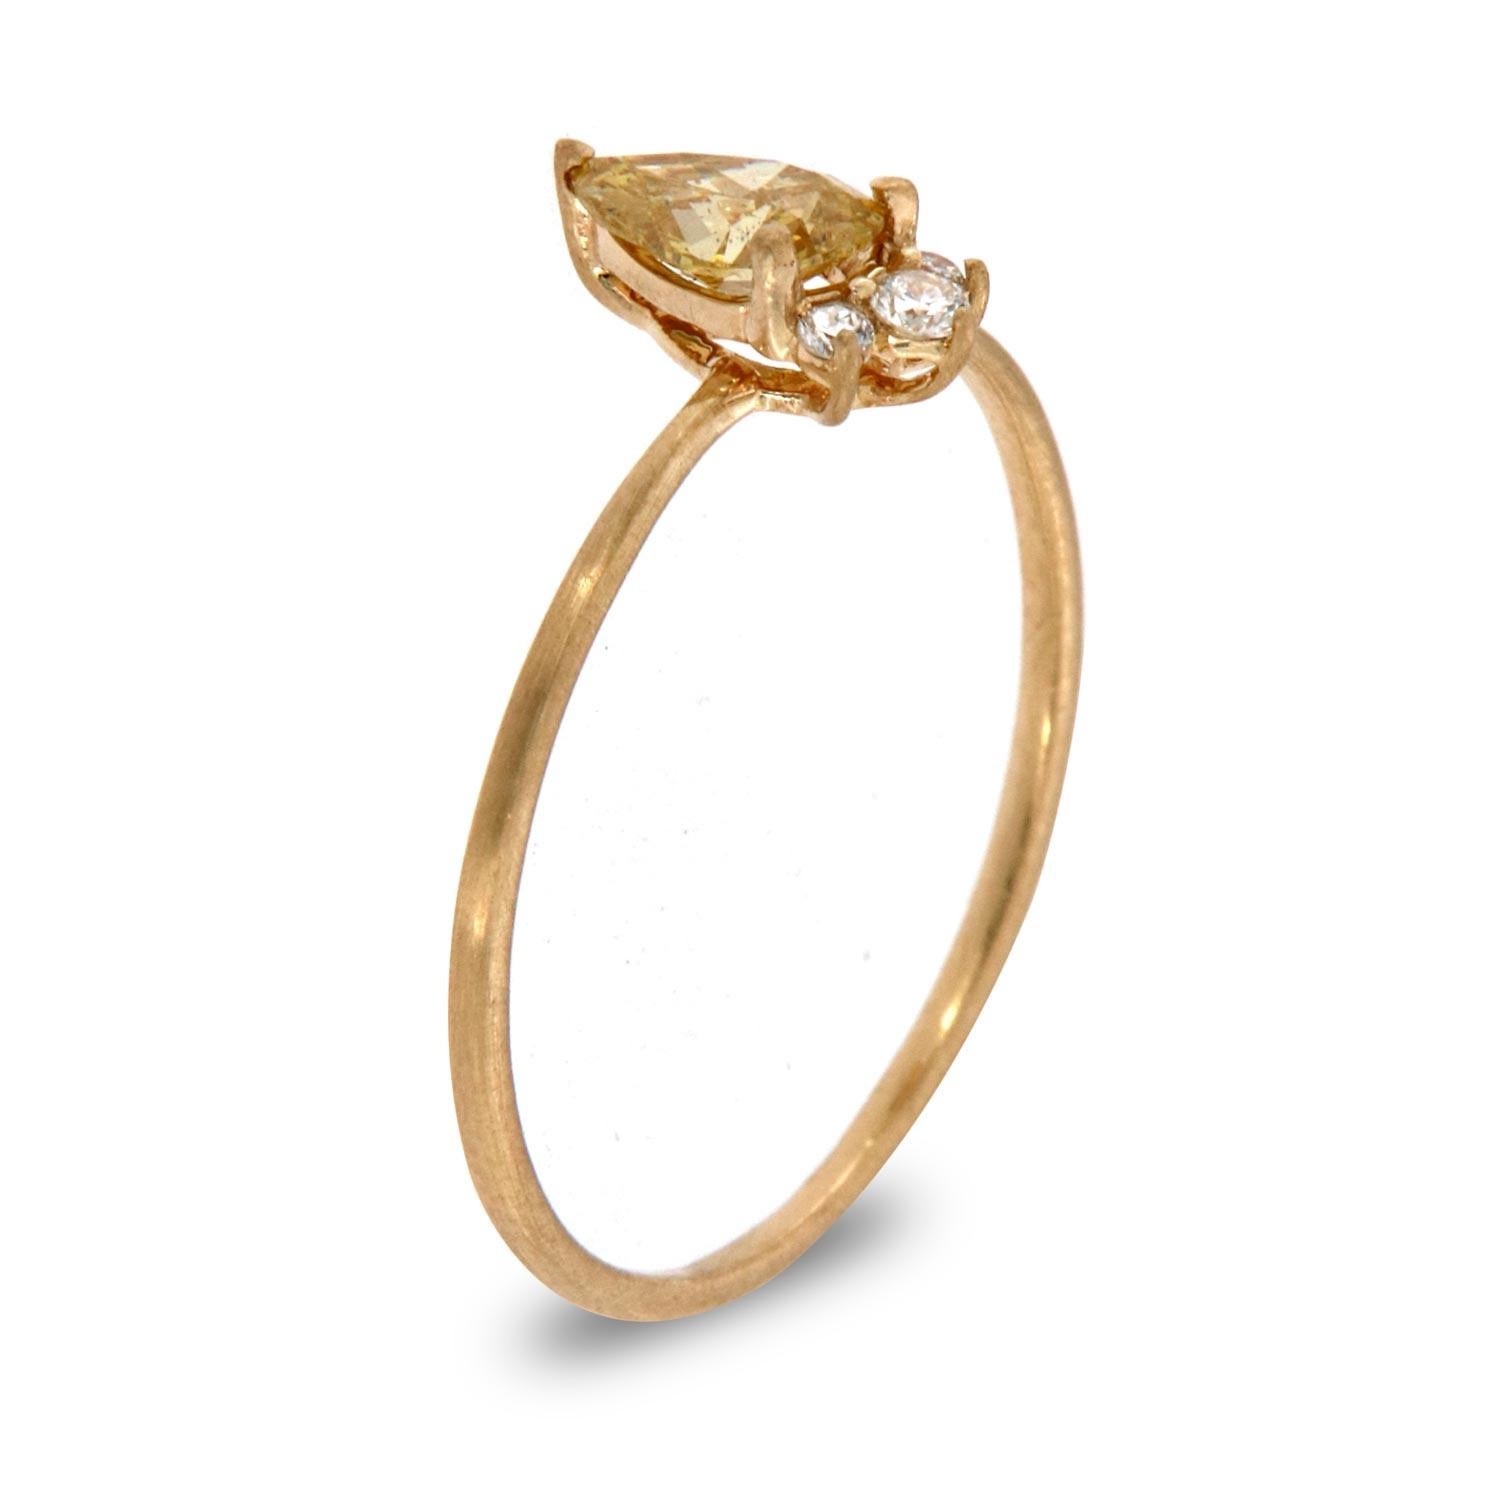 This petite fashion ring is impressive in its vintage appeal, featuring a natural fancy intense yellow pear shaped diamond, accented with round brilliant diamonds. Experience the difference in person!

Product details: 

Center Gemstone Type: